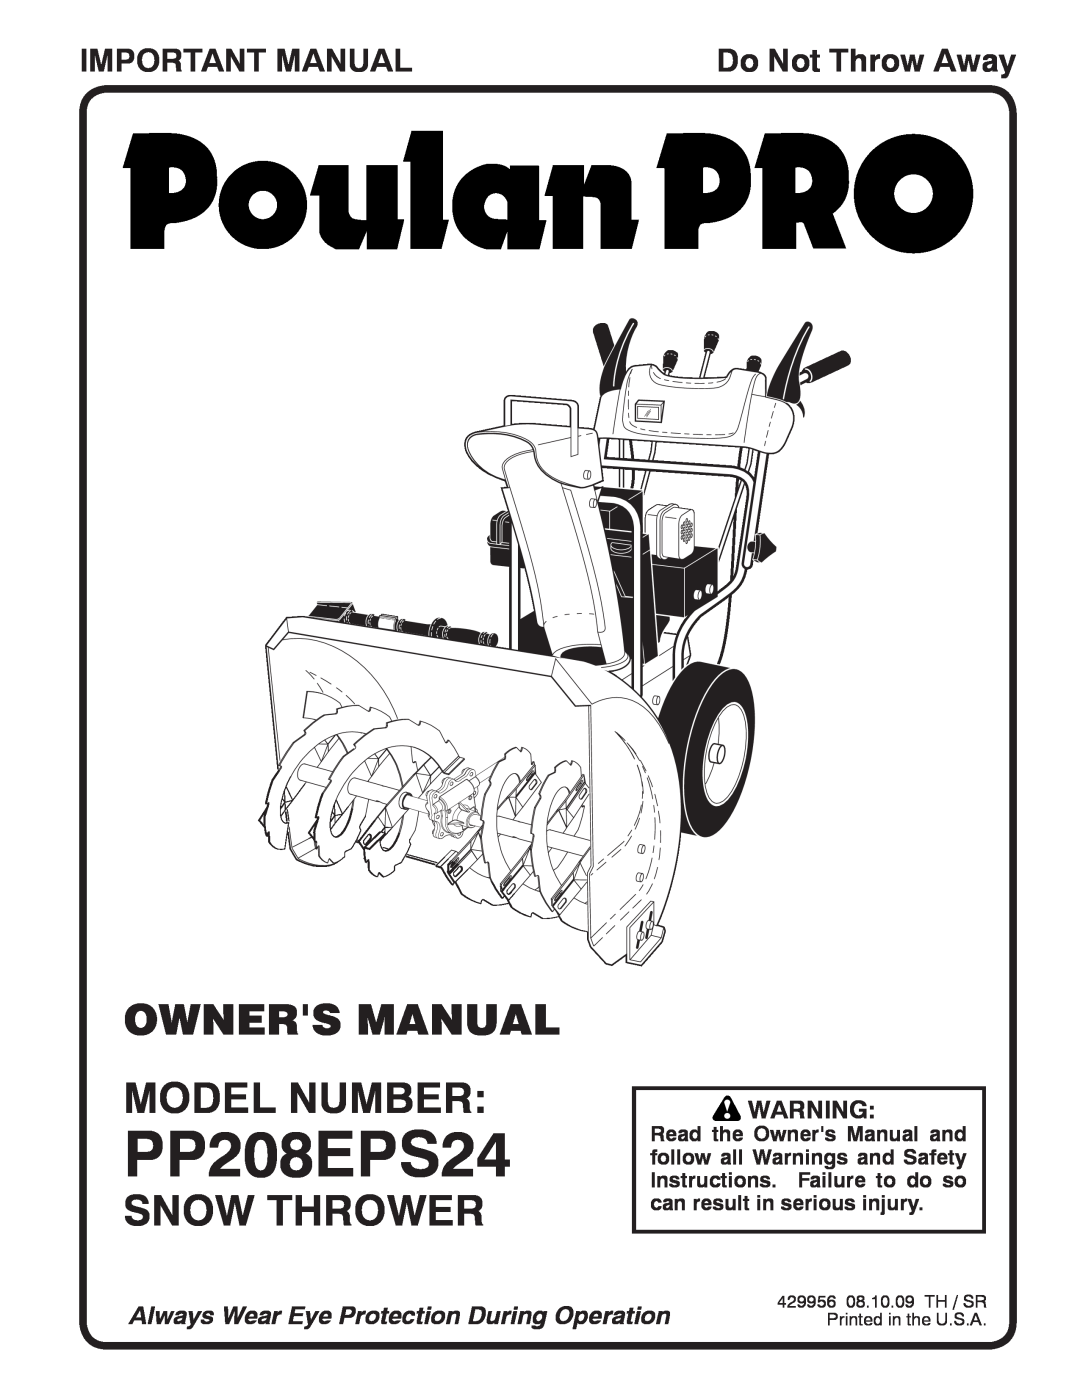 Poulan 96198002701, 429956 owner manual Snow Thrower, Important Manual, PP208EPS24, Do Not Throw Away 